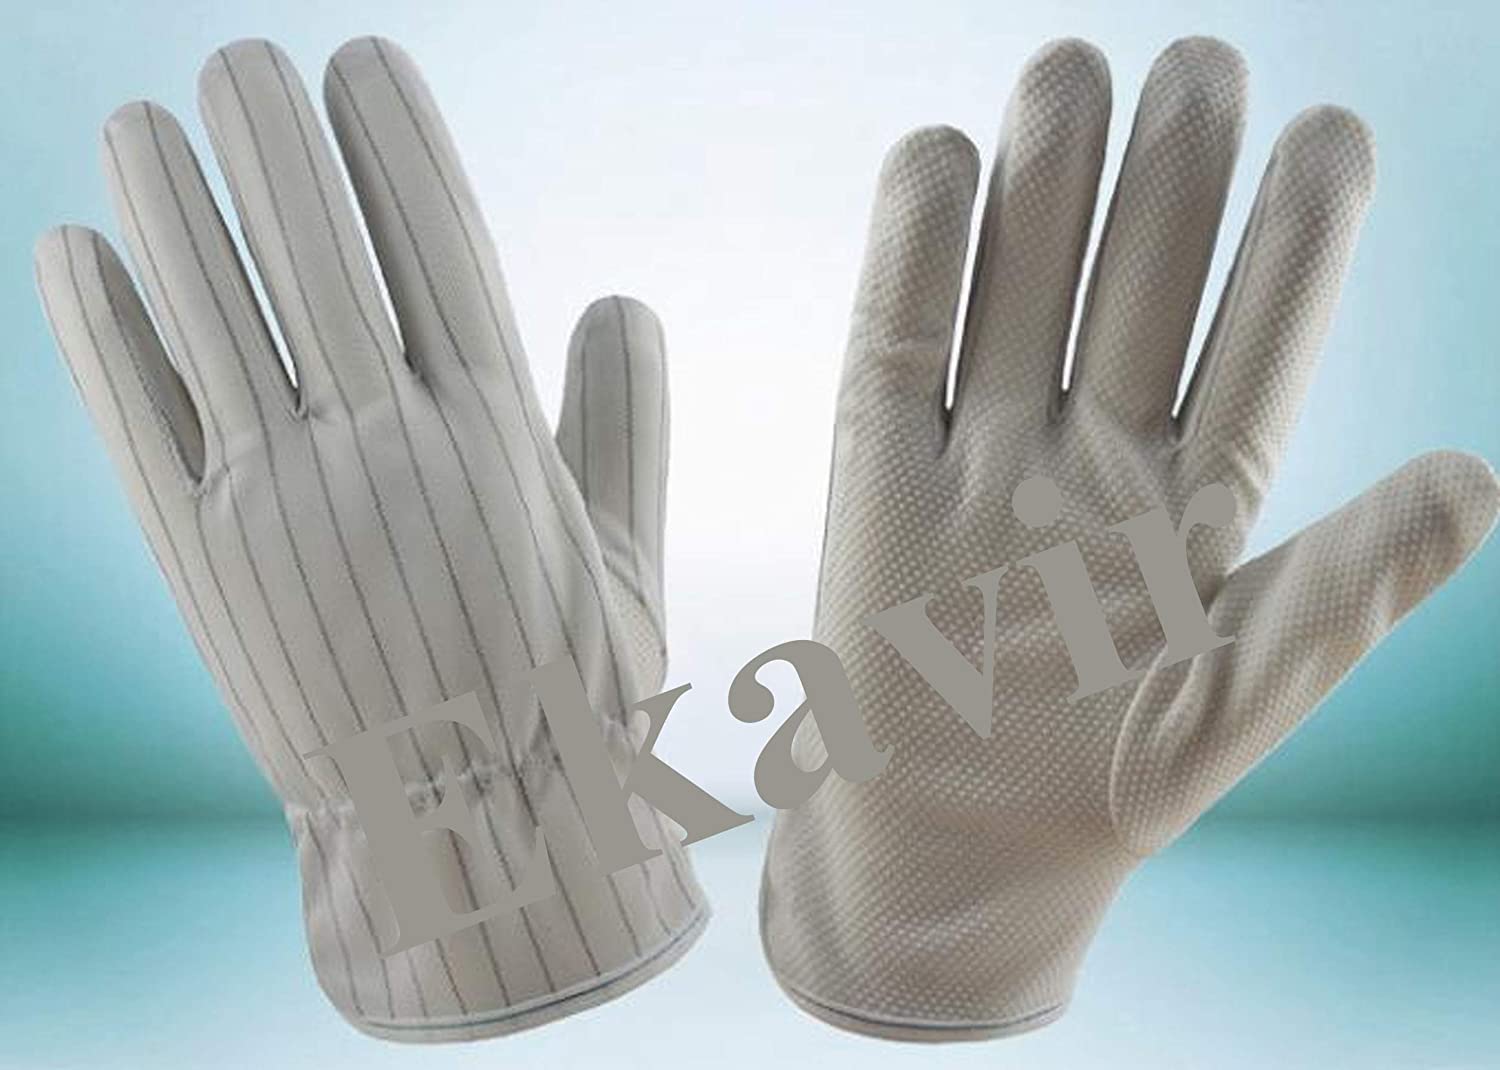 Ekavir ESD Safe Hand Gloves, Anti Static Hand Gloves, for Electronics Product use Computer, Mobile Repair Etc. (2 Pair)